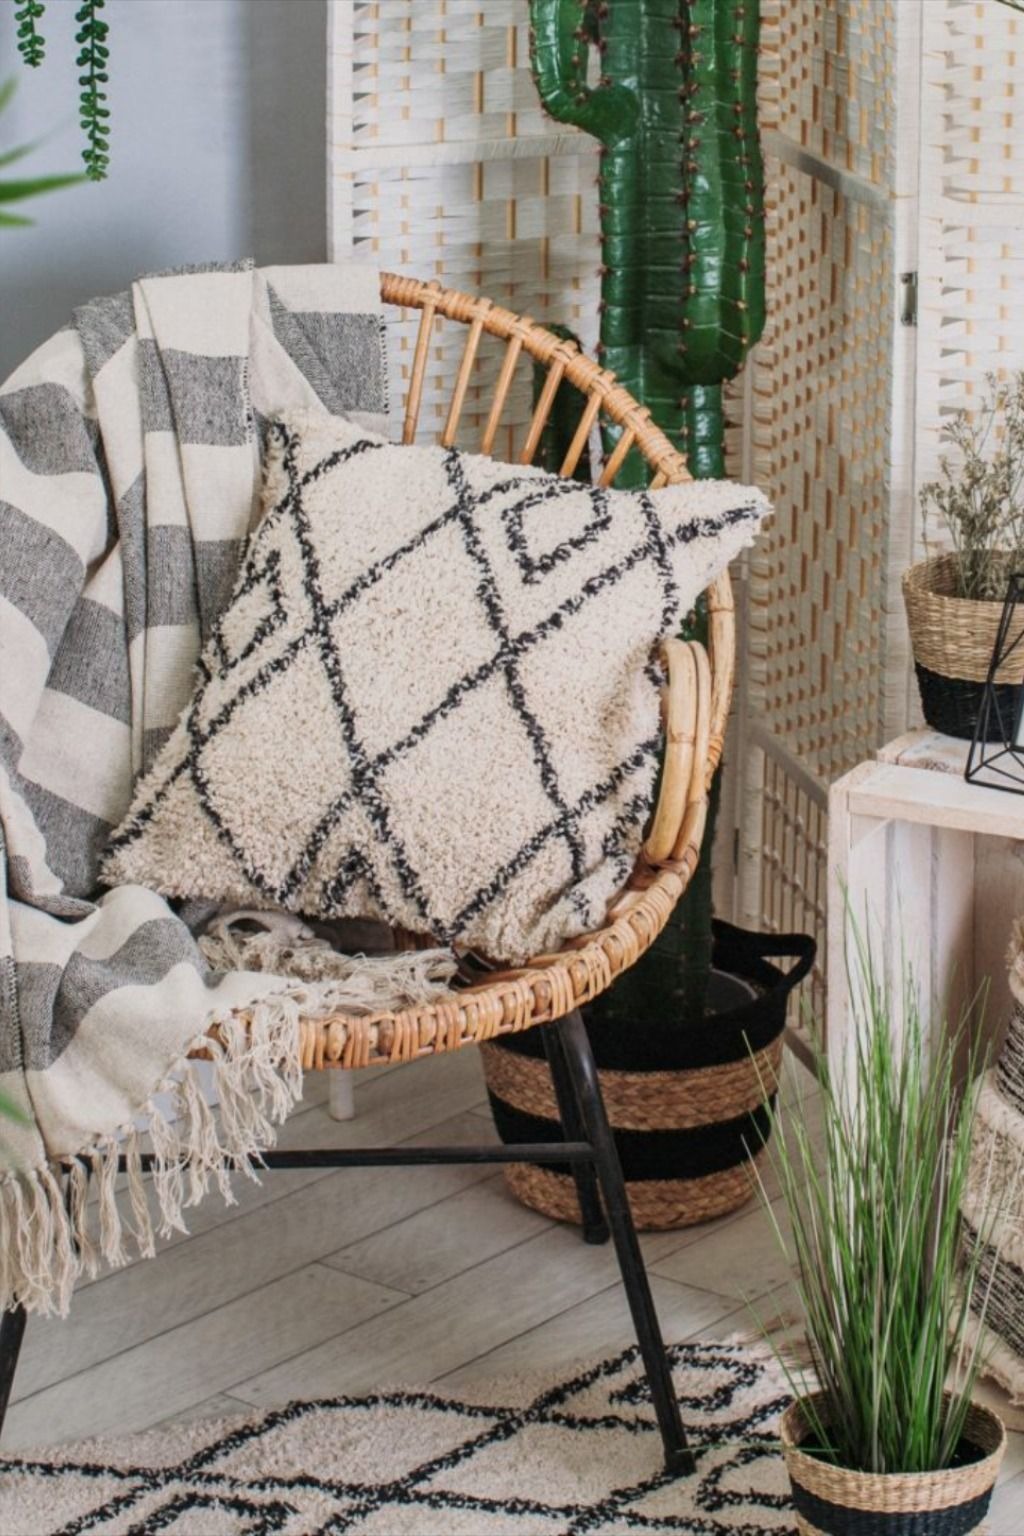 Create a Bohemian Nook with the Round Chair